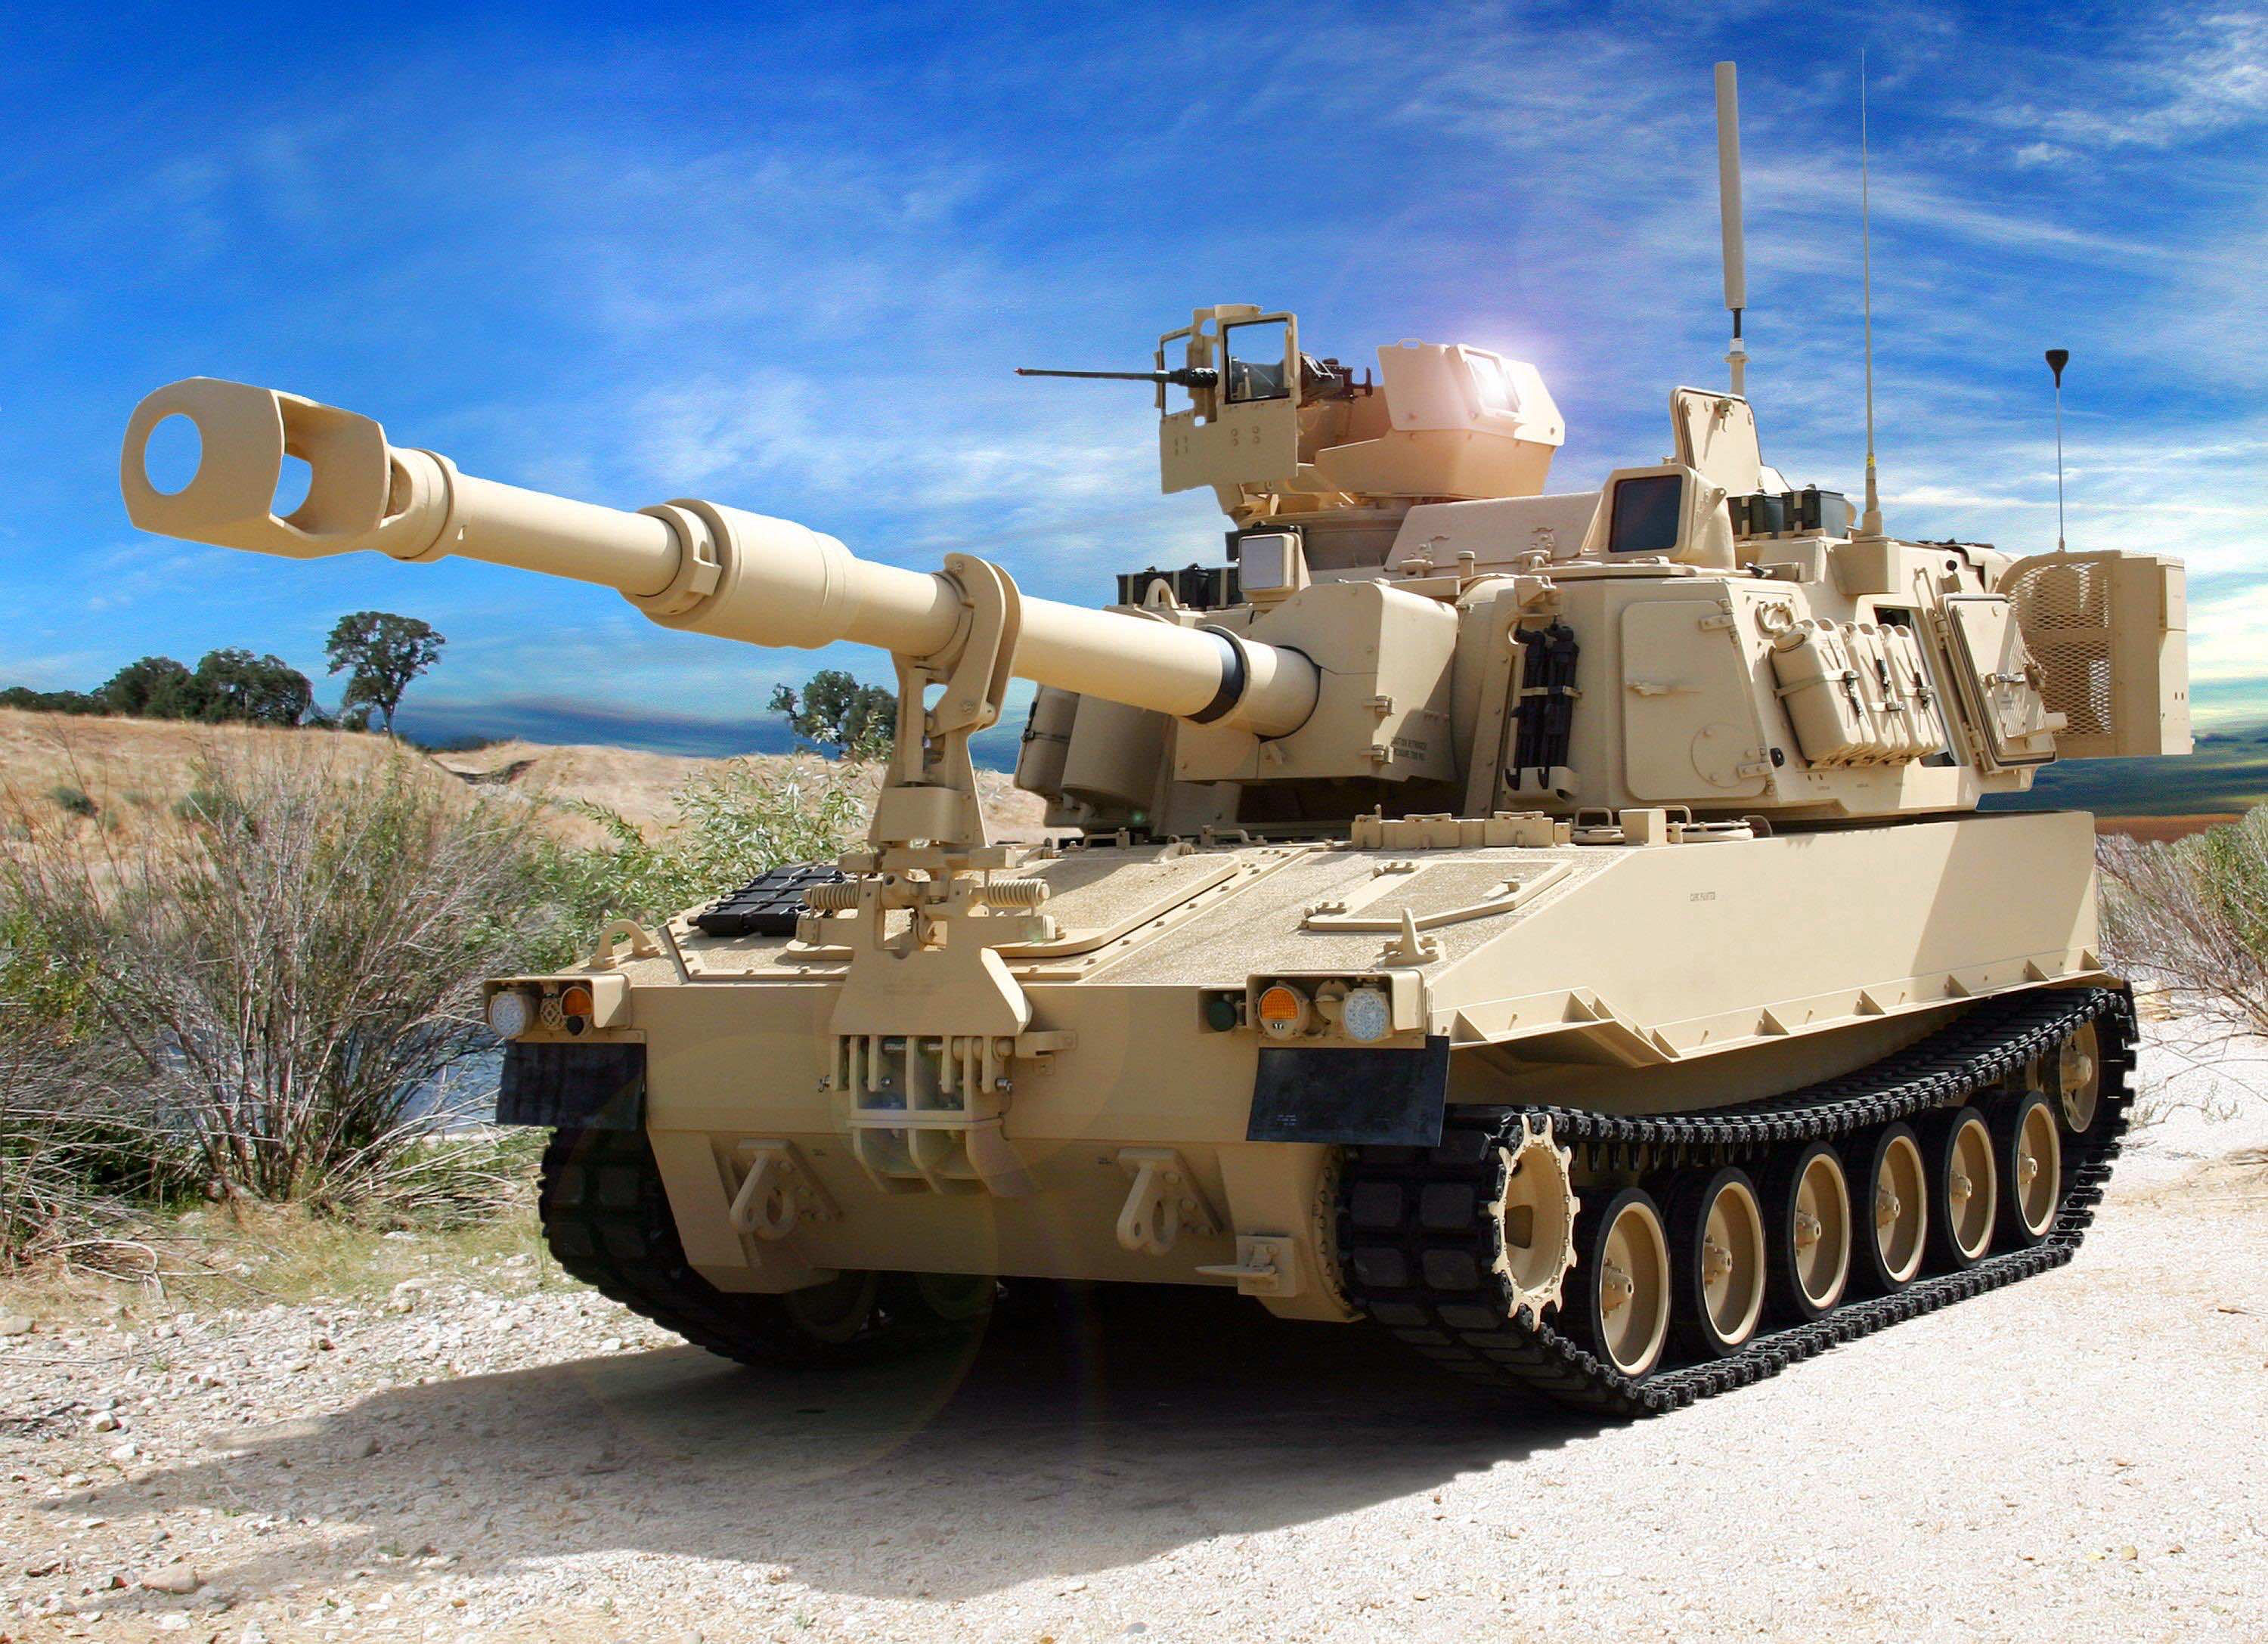 Army Tank Wallpapers In HD For Free Download